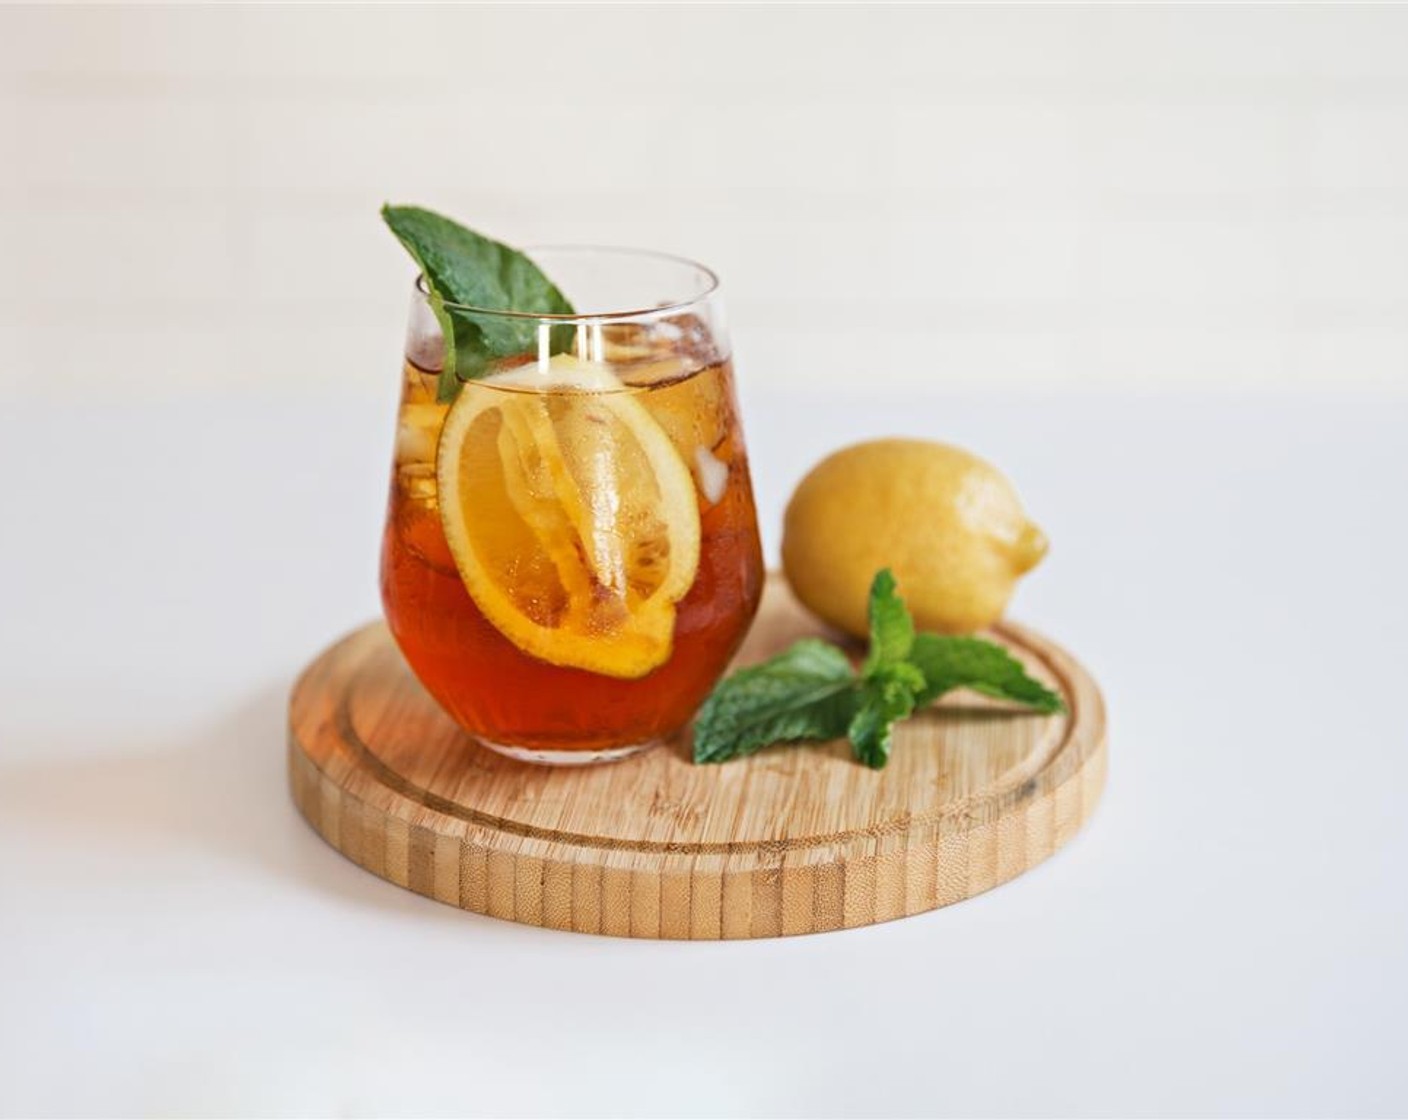 step 5 Serve the sweet tea in a glass filled with ice and garnish with Fresh Mint (to taste) and Lemons (to taste) if desired. Serve and enjoy!